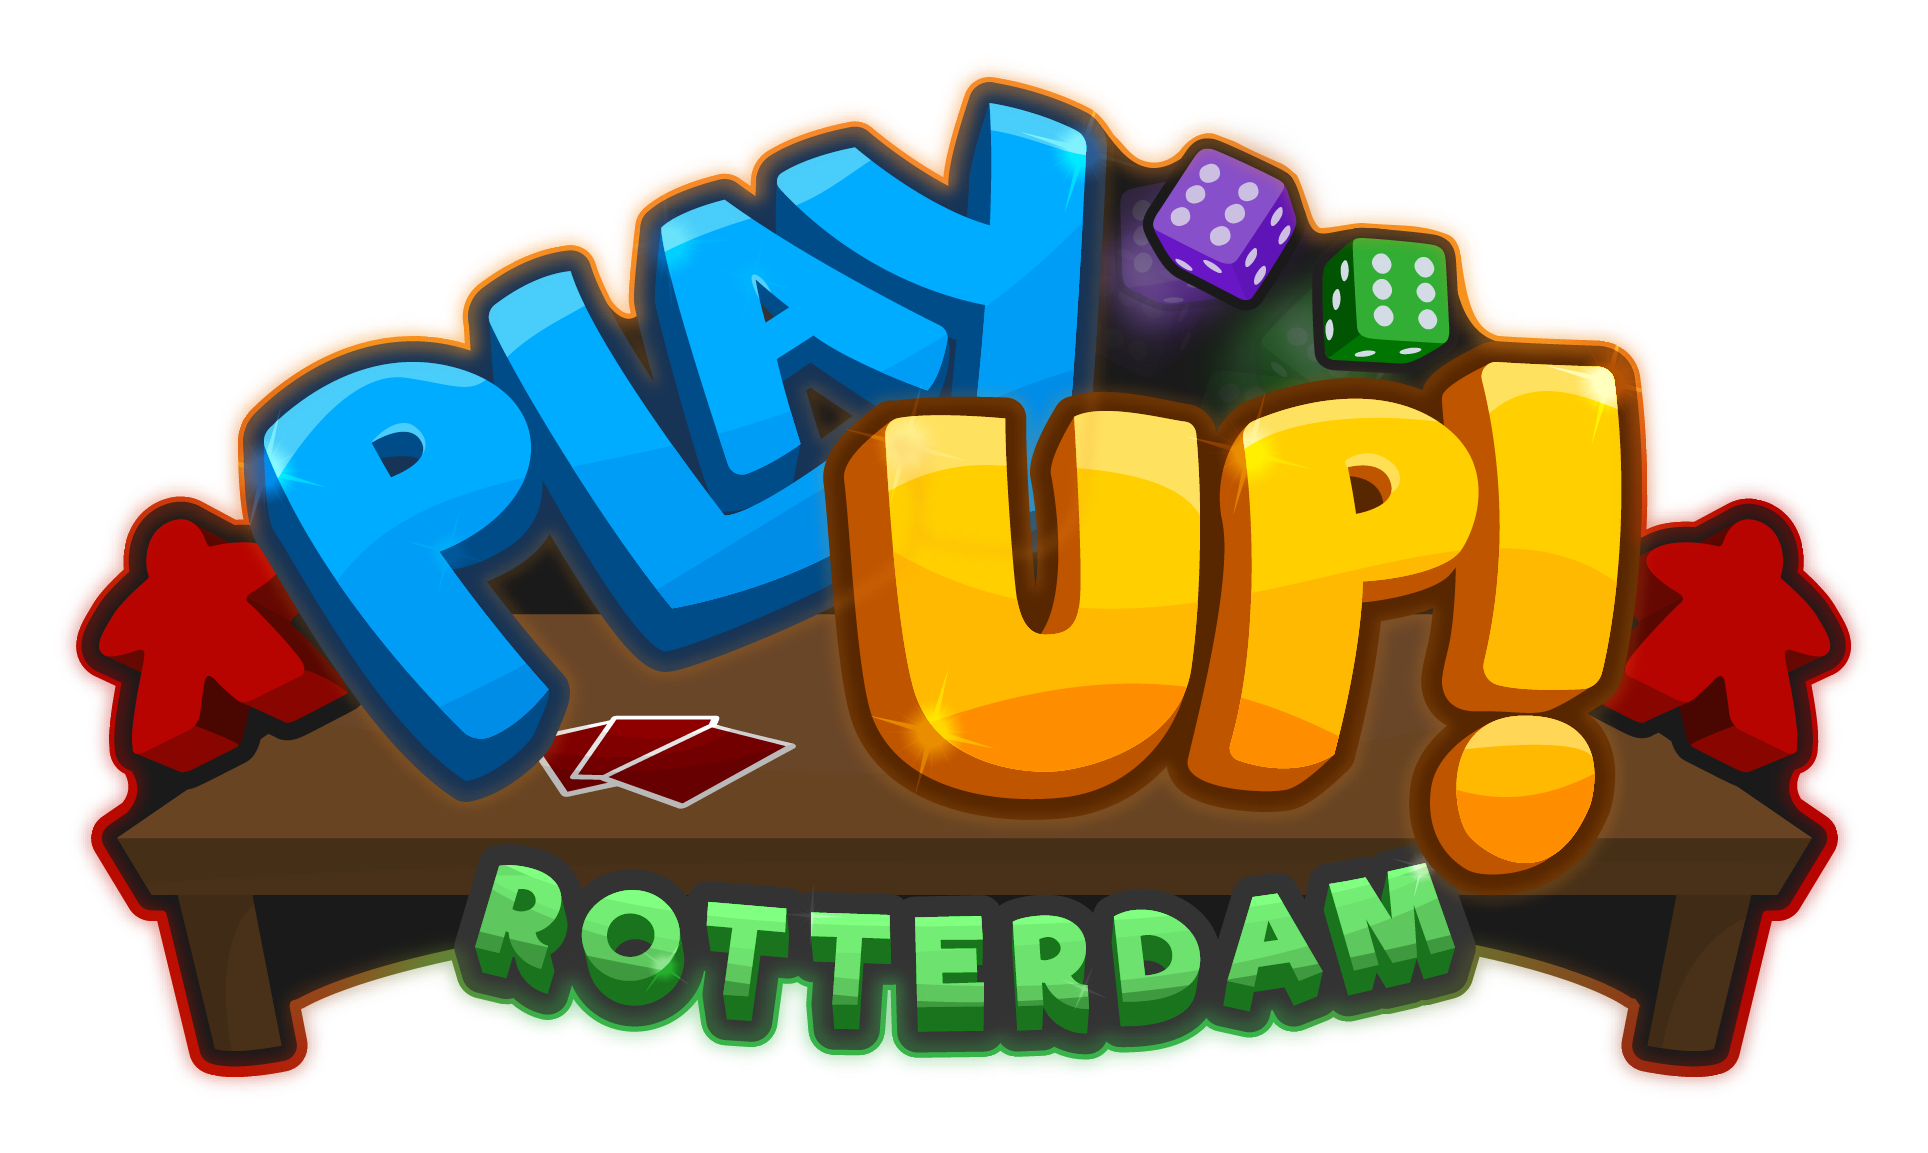 https://www.play-up.nl/wp-content/uploads/2022/11/Logoplayup.png